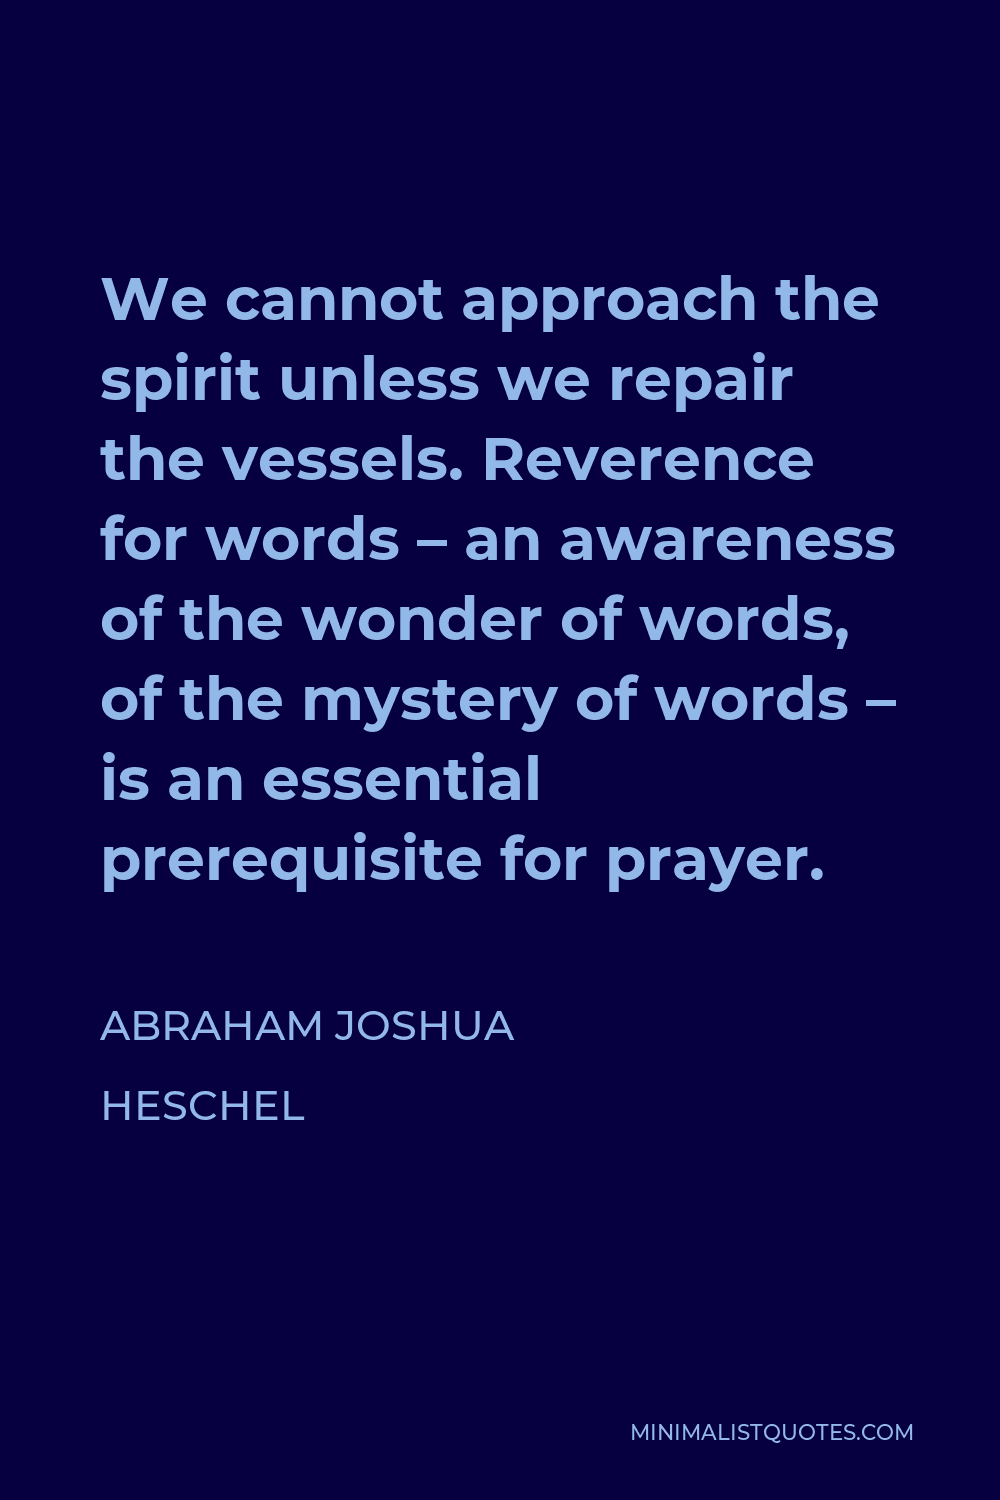 Abraham Joshua Heschel Quote - We cannot approach the spirit unless we repair the vessels. Reverence for words – an awareness of the wonder of words, of the mystery of words – is an essential prerequisite for prayer.